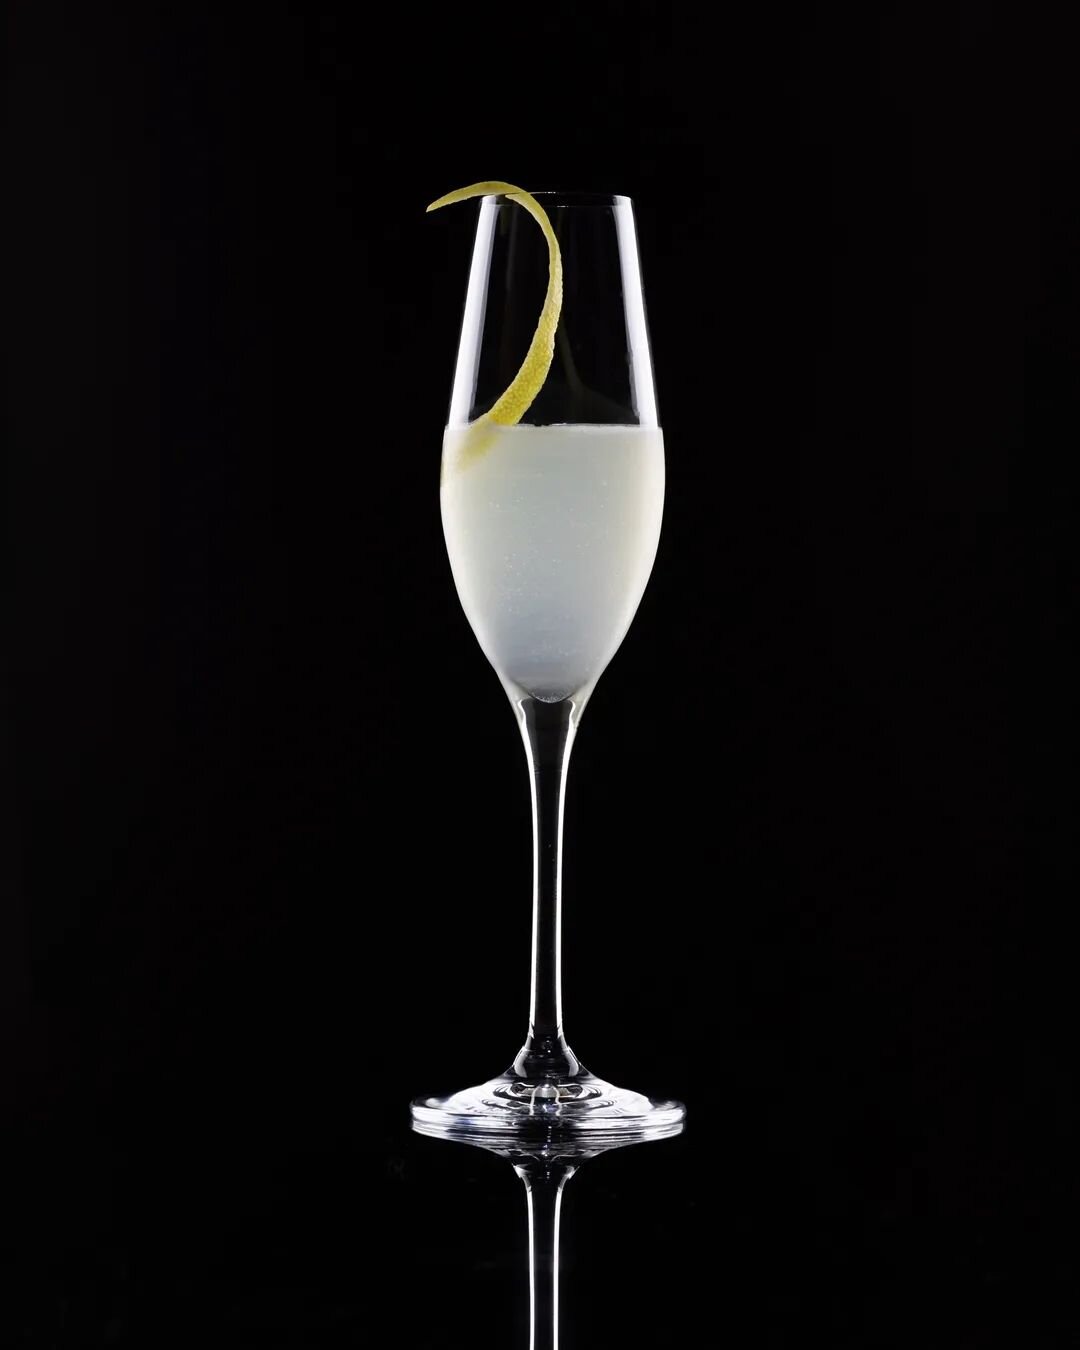 We have some gorgeous champagne glasses! Our French 75 is included in our deluxe open bar package and can be added to any bar menu.

#cocktails #orlandoevents #weddingcocktails